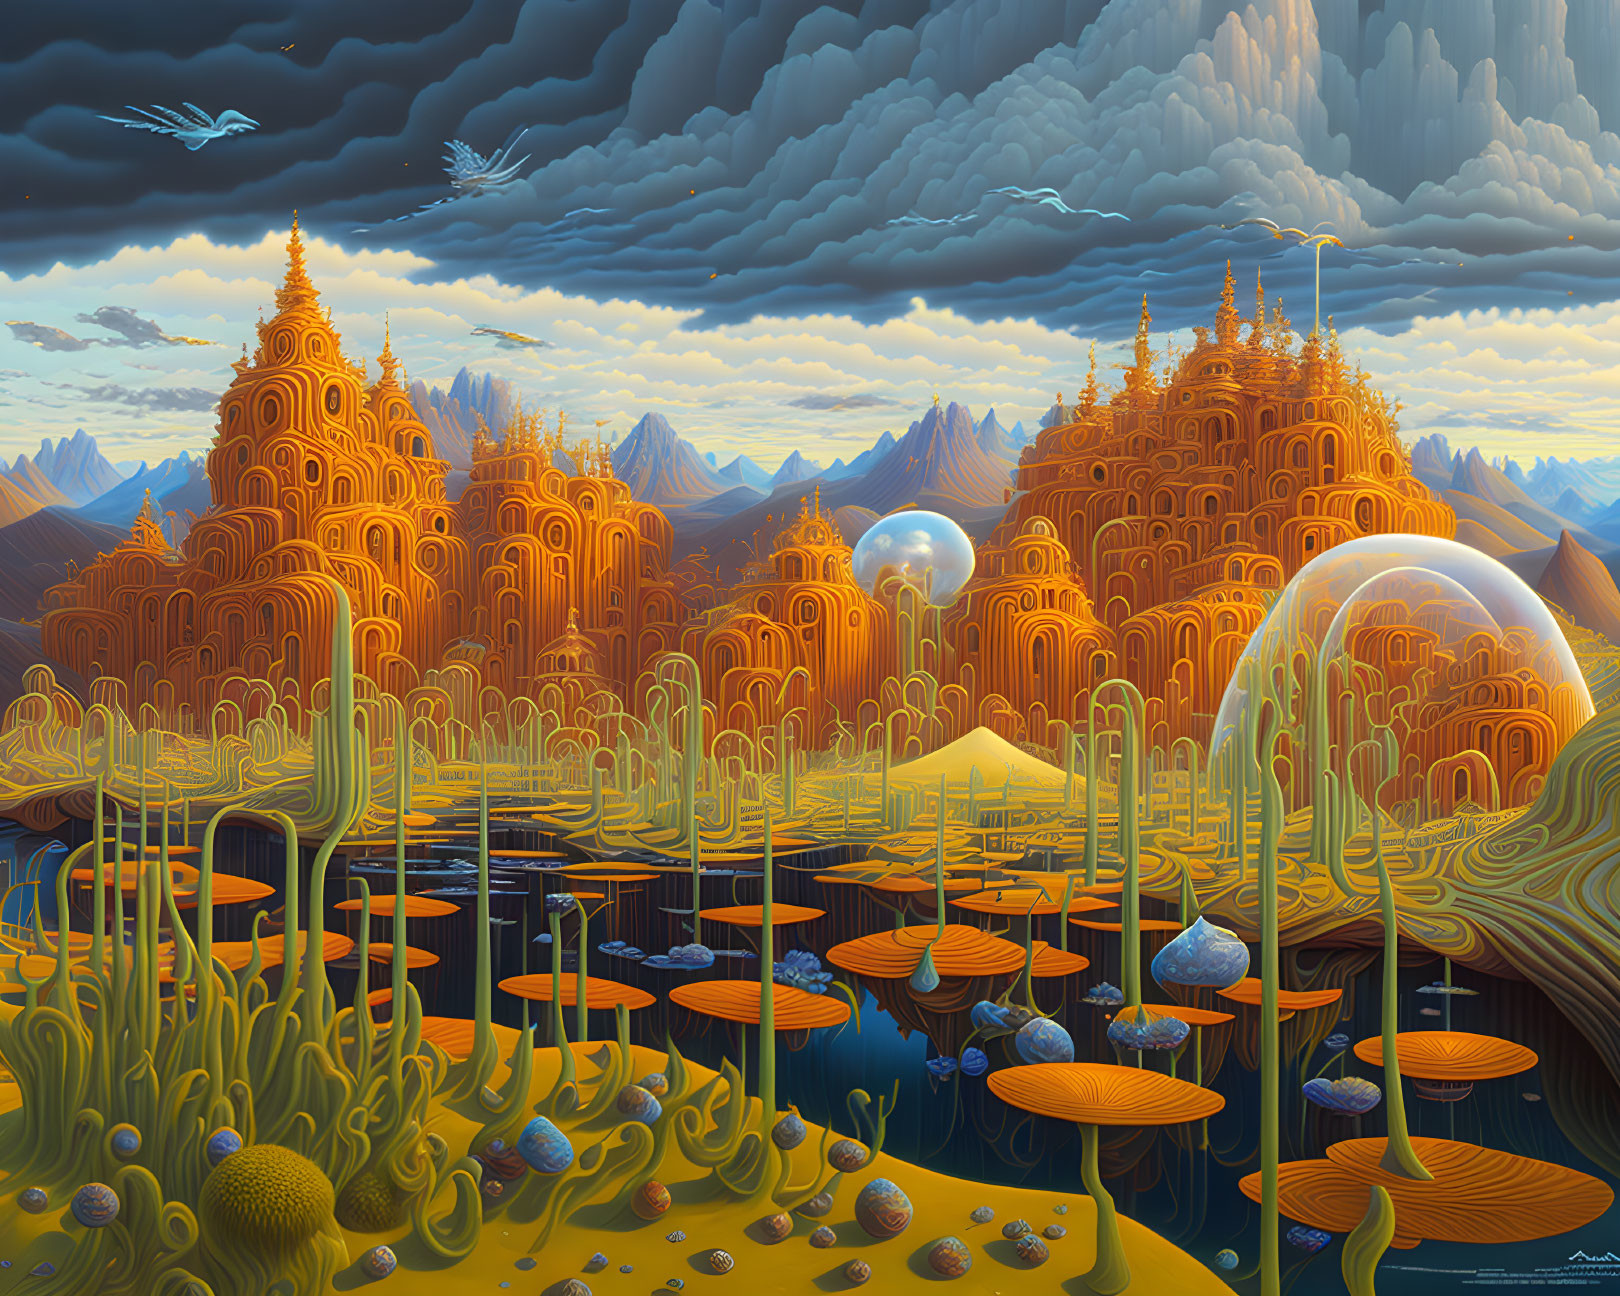 Fantastical landscape with orange-yellow structures, towering mushrooms, spheres, and water features